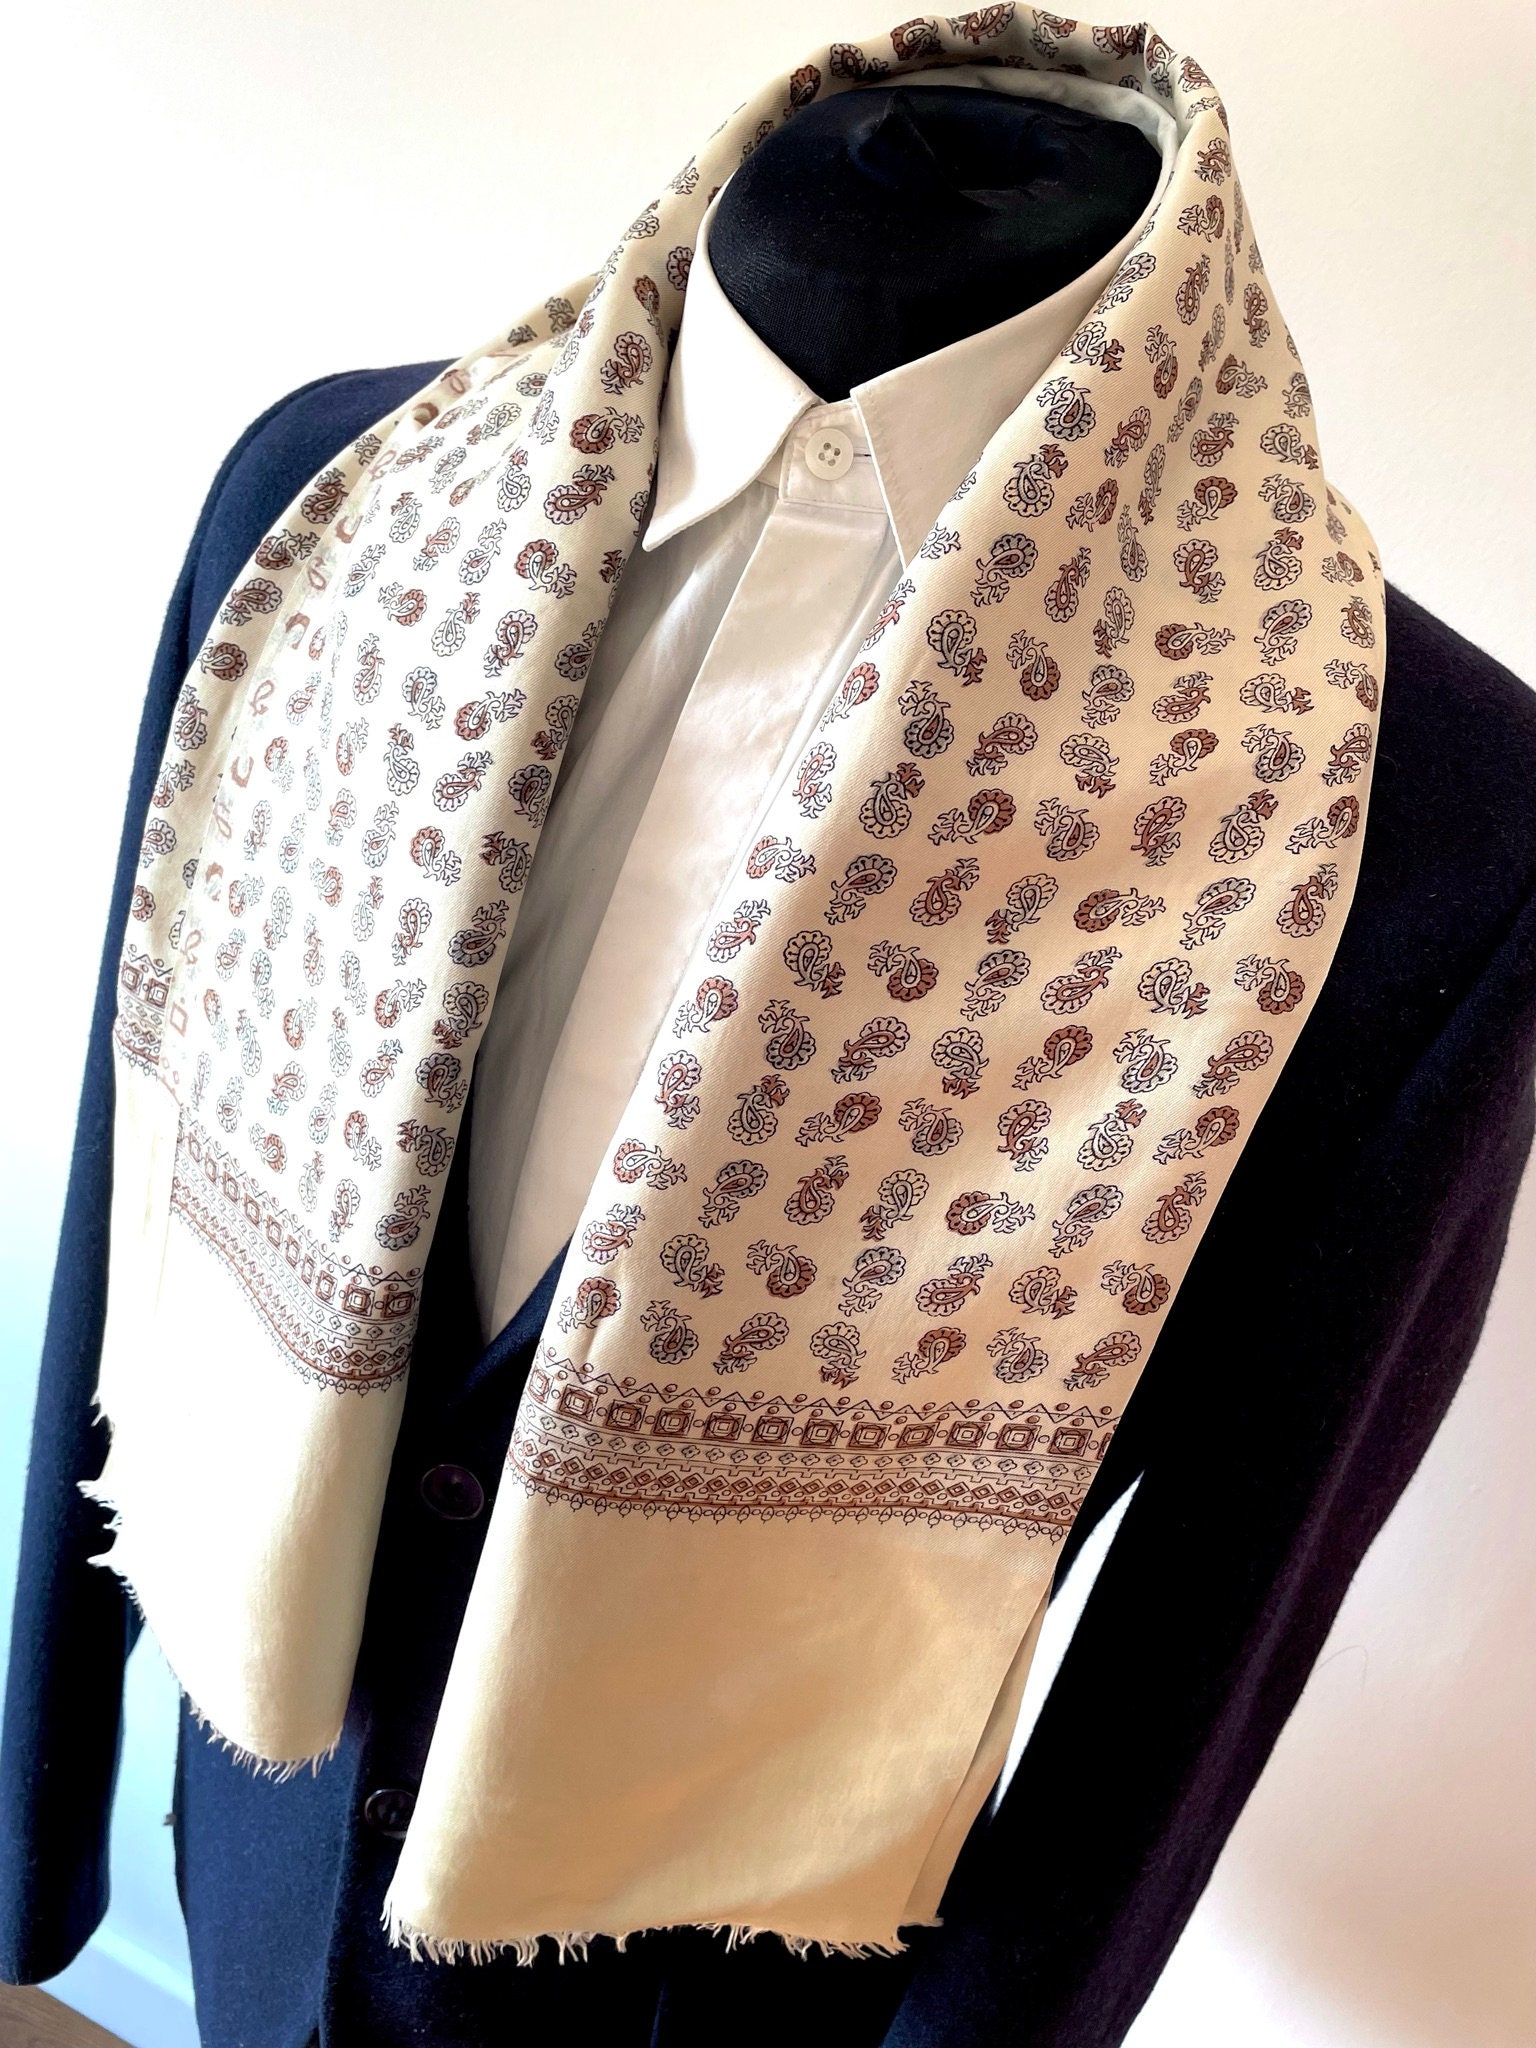 vintage 60s  Style Mod Scarf Gift for Him Mens Paisley Scarf